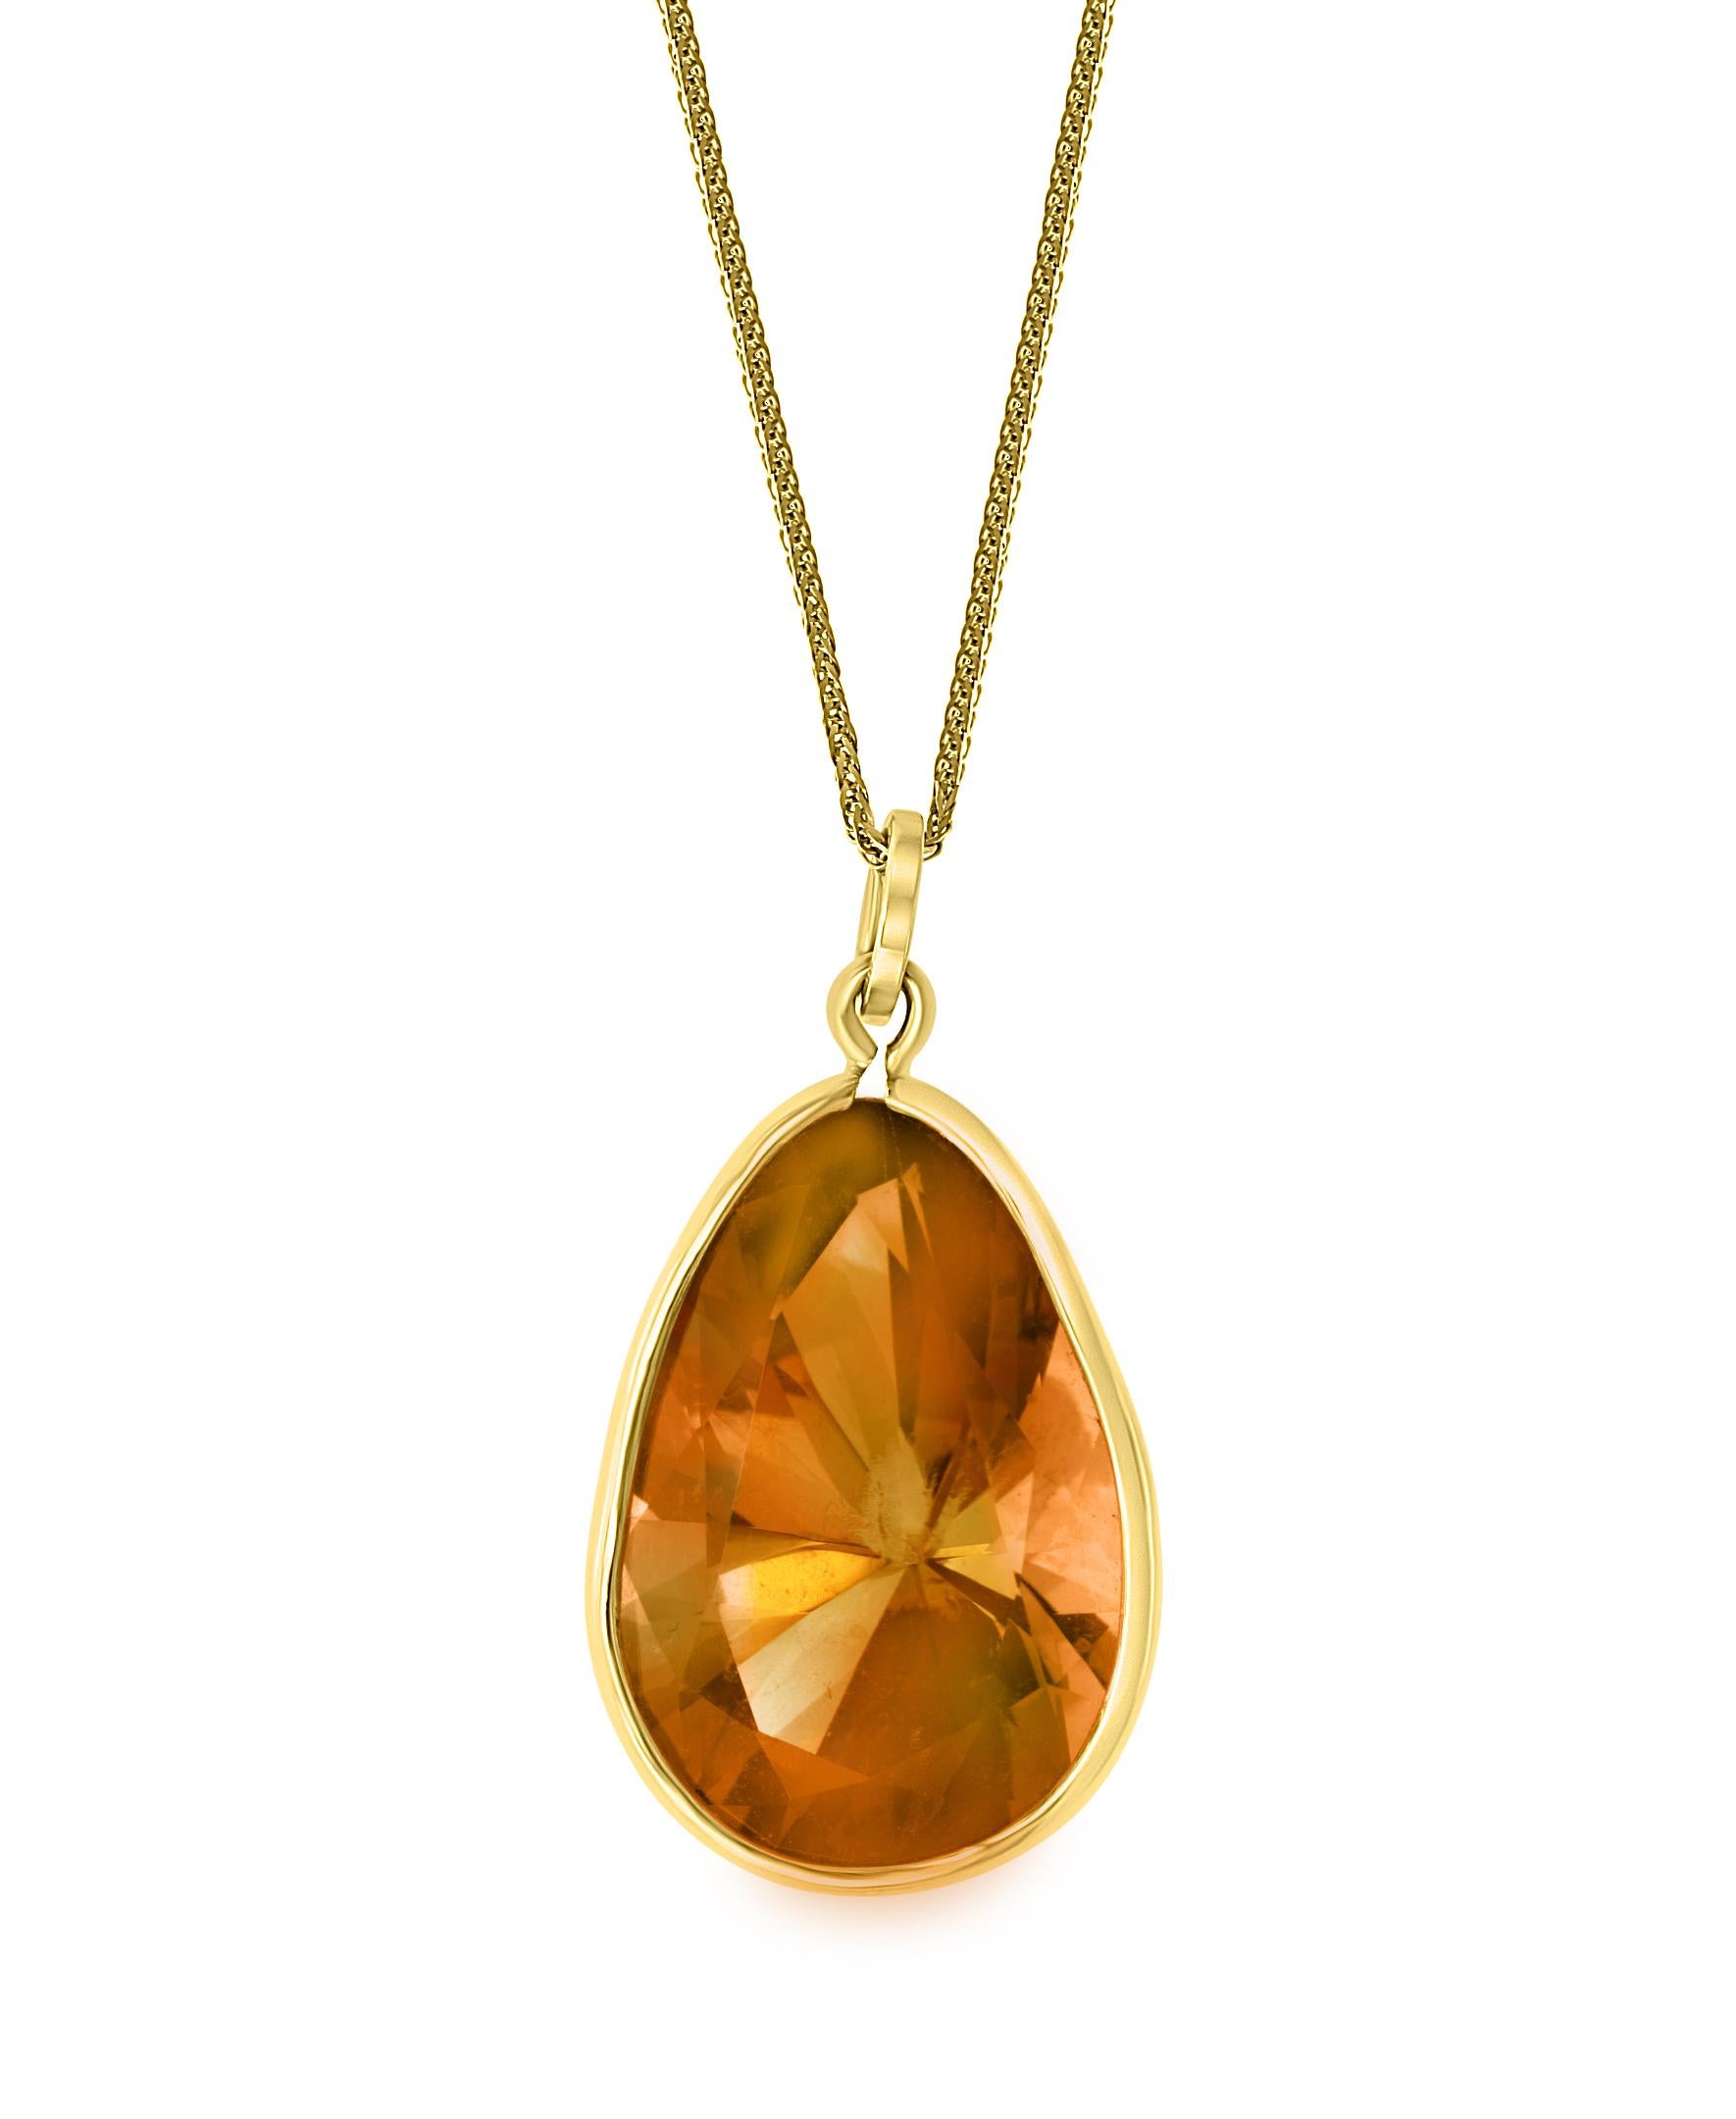 19 Carat Pear Shape Citrine Pendent or Necklace 14 Karat Yellow Gold with Chain 6